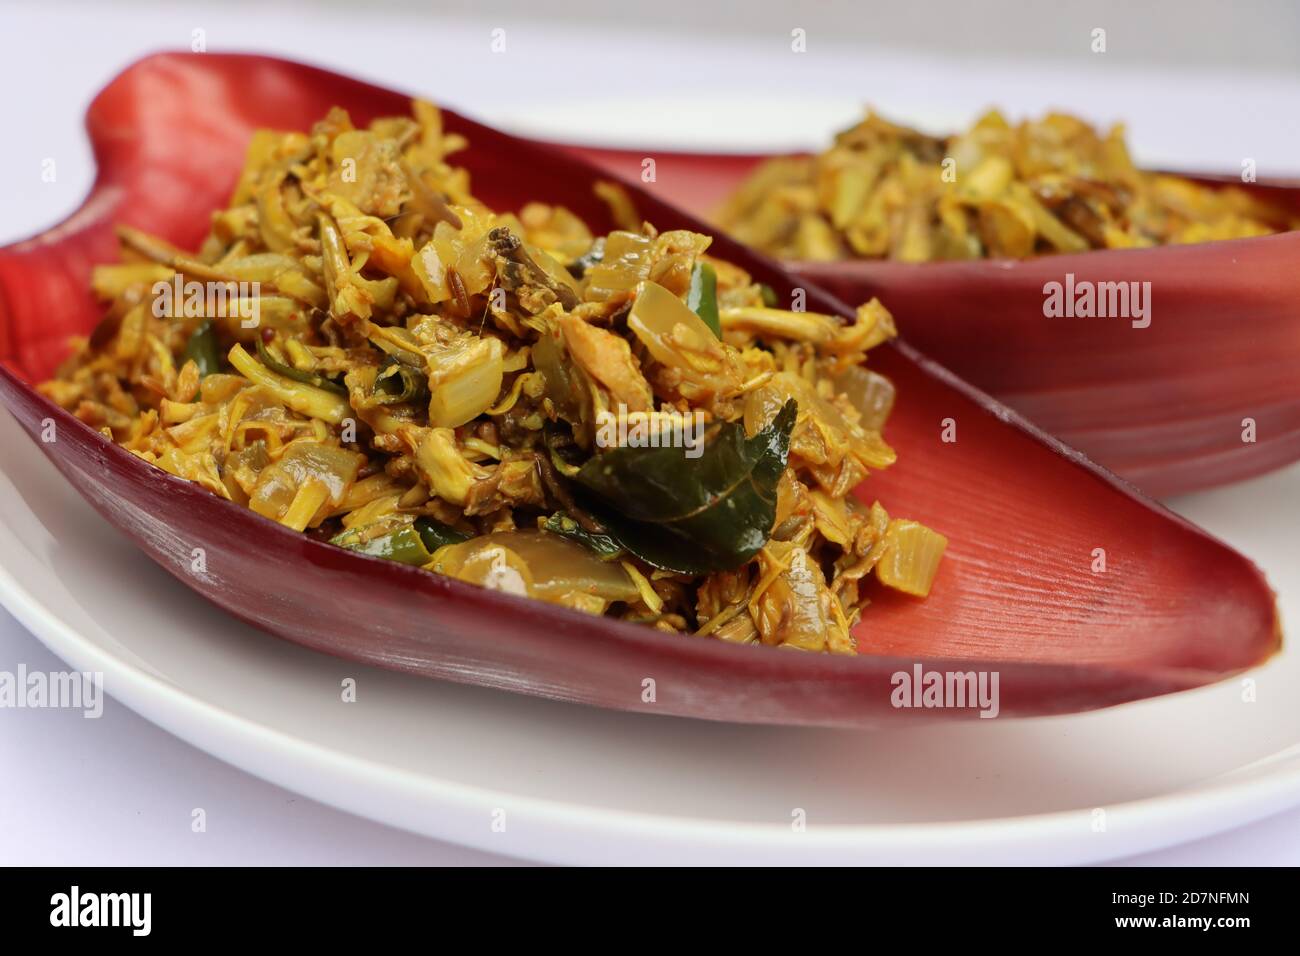 Banana flower curry, South Indian food, Plantain flower fry Stock Photo